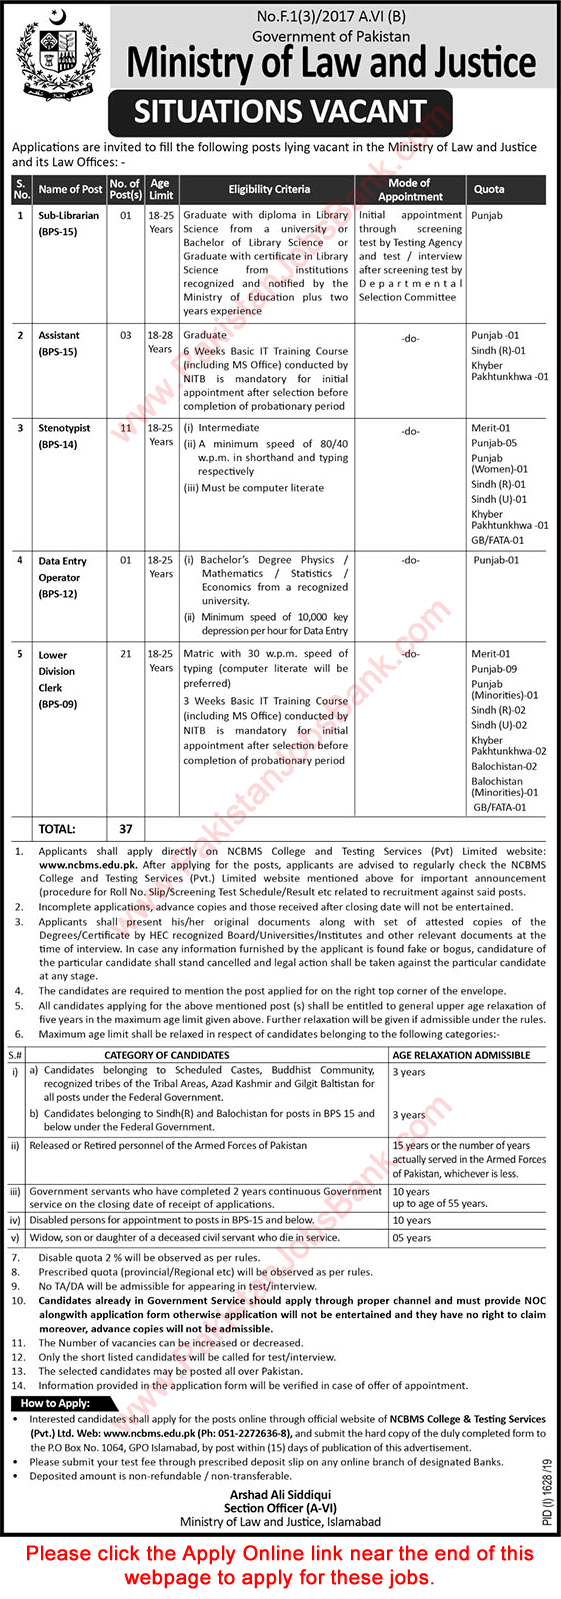 Ministry of Law and Justice Jobs September 2019 Apply Online Clerks, Stenotypists & Others Latest